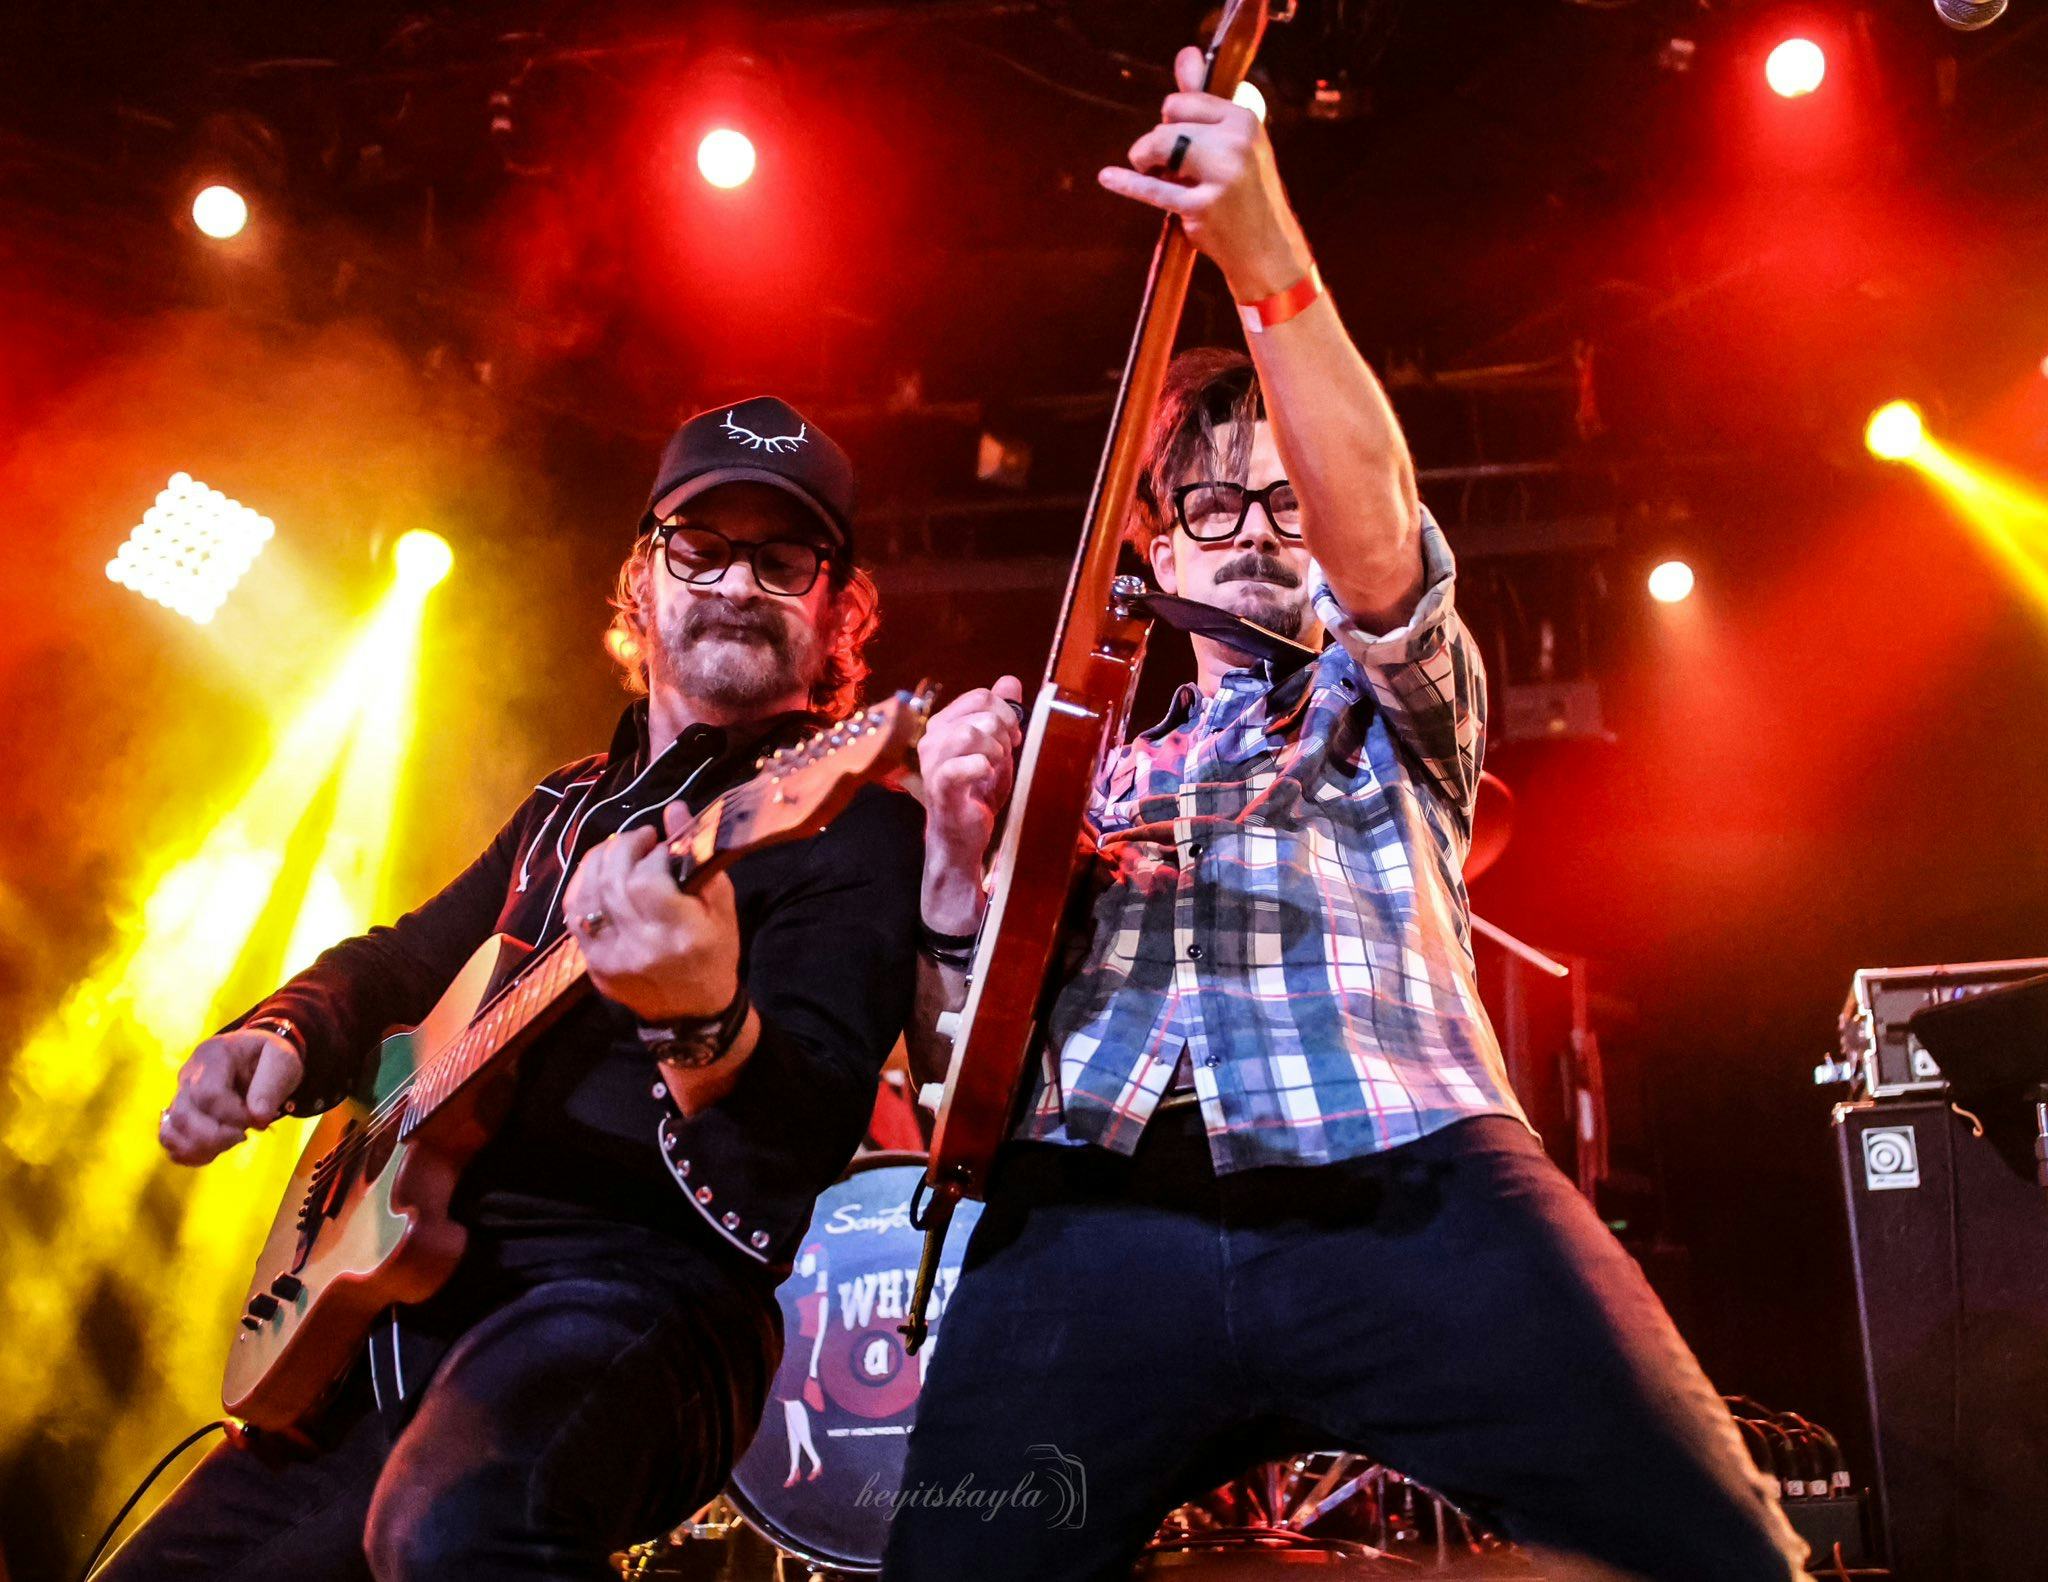 Richard Speight Jr. & Billy Moran Perform Songs from "Fistfights & Hug-Outs"